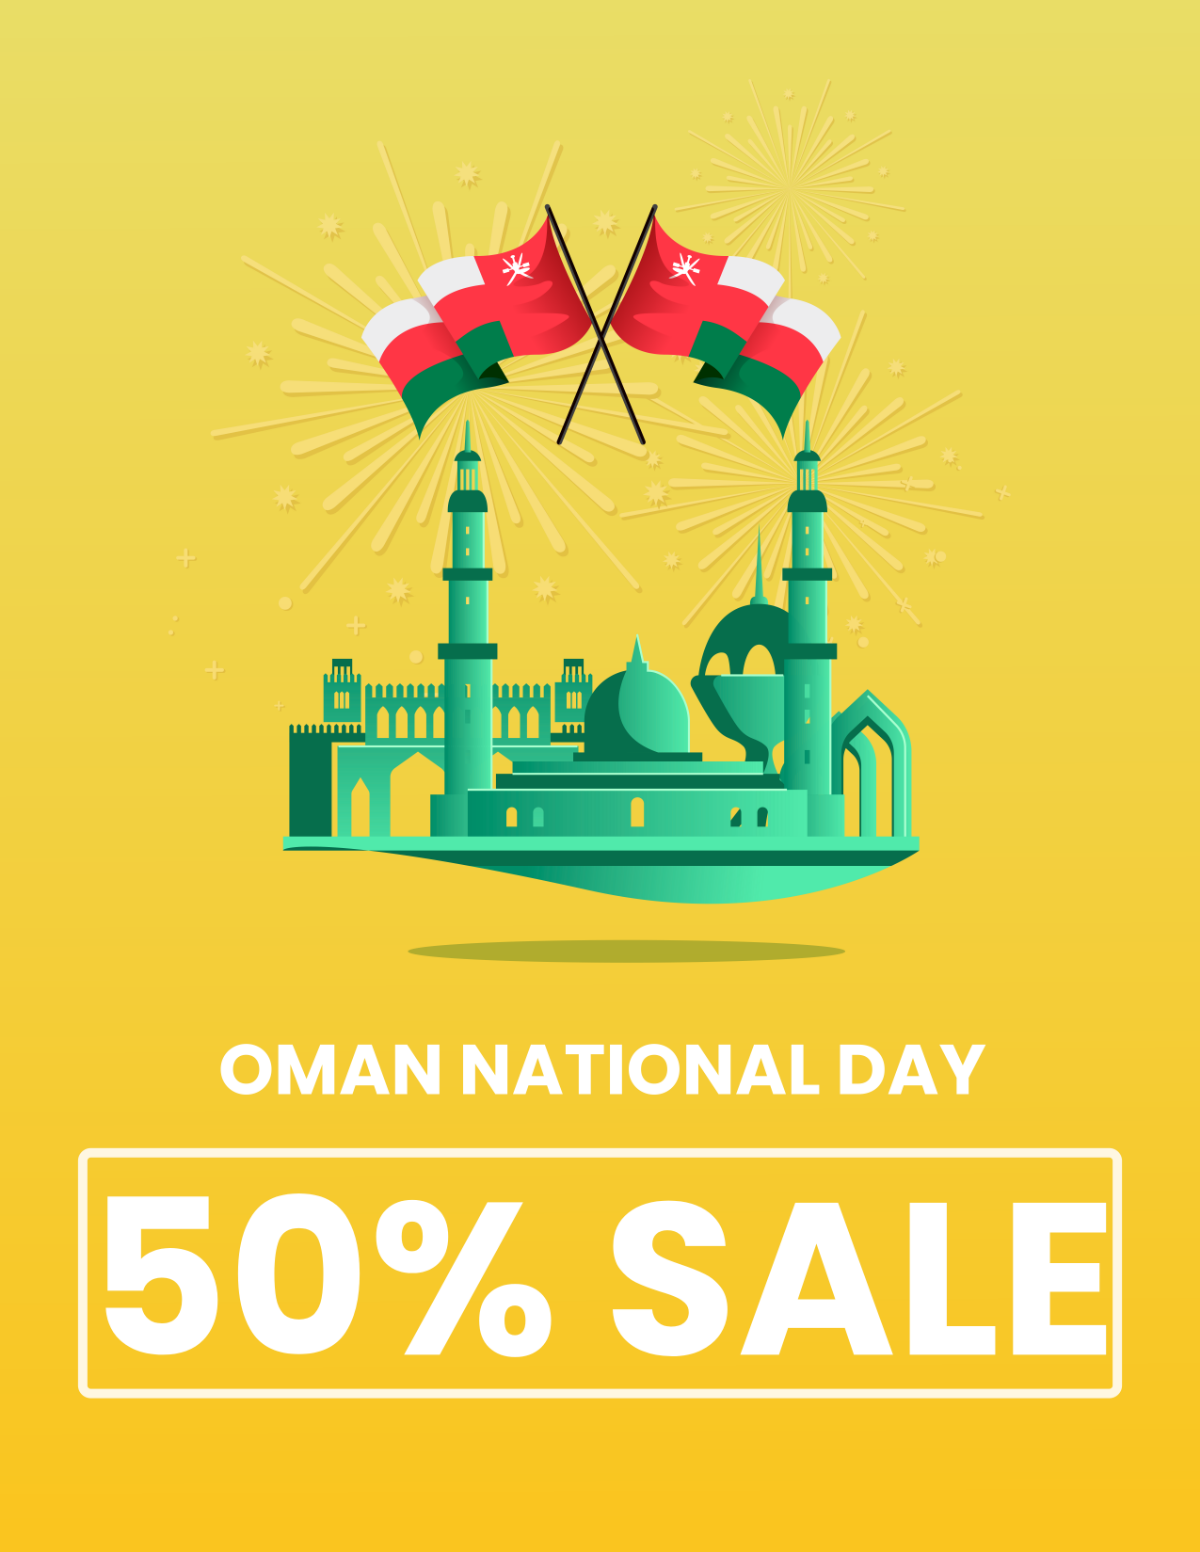 Oman National Day Sales Flyer